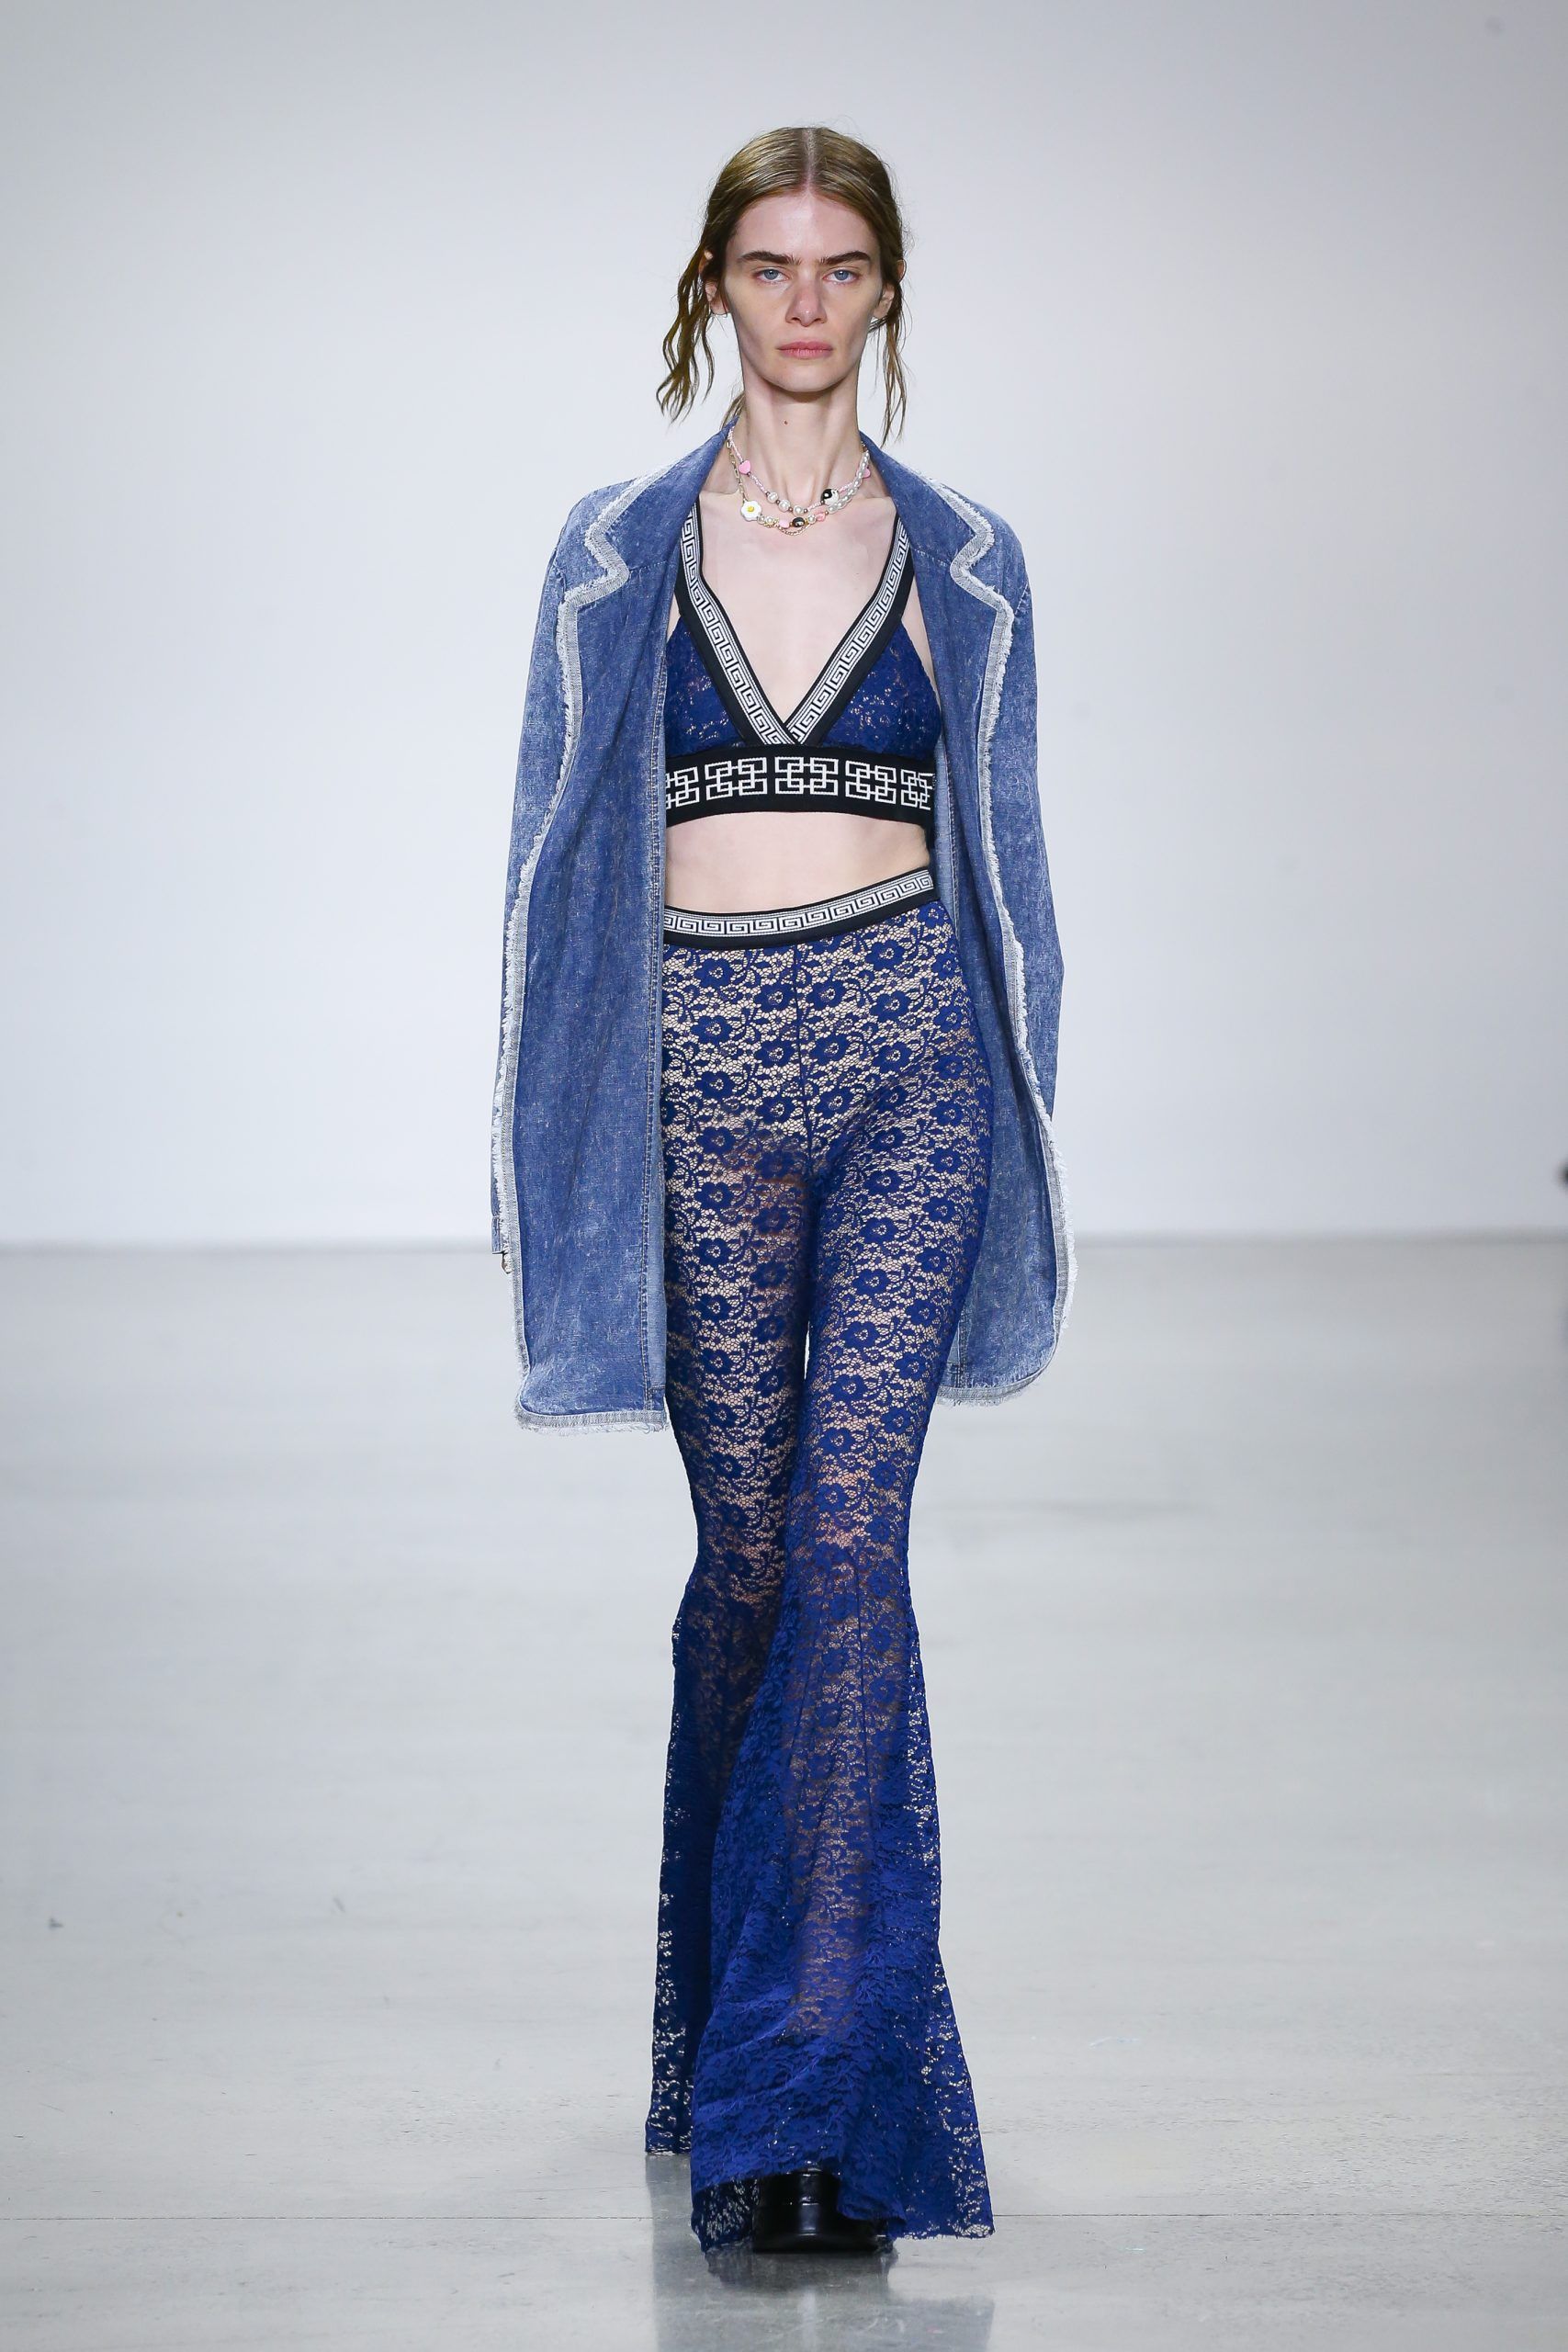 Female model with blue jacket and trousers at Metaverse, Past, Present, and Future SS23 show at New York Fashion Week 